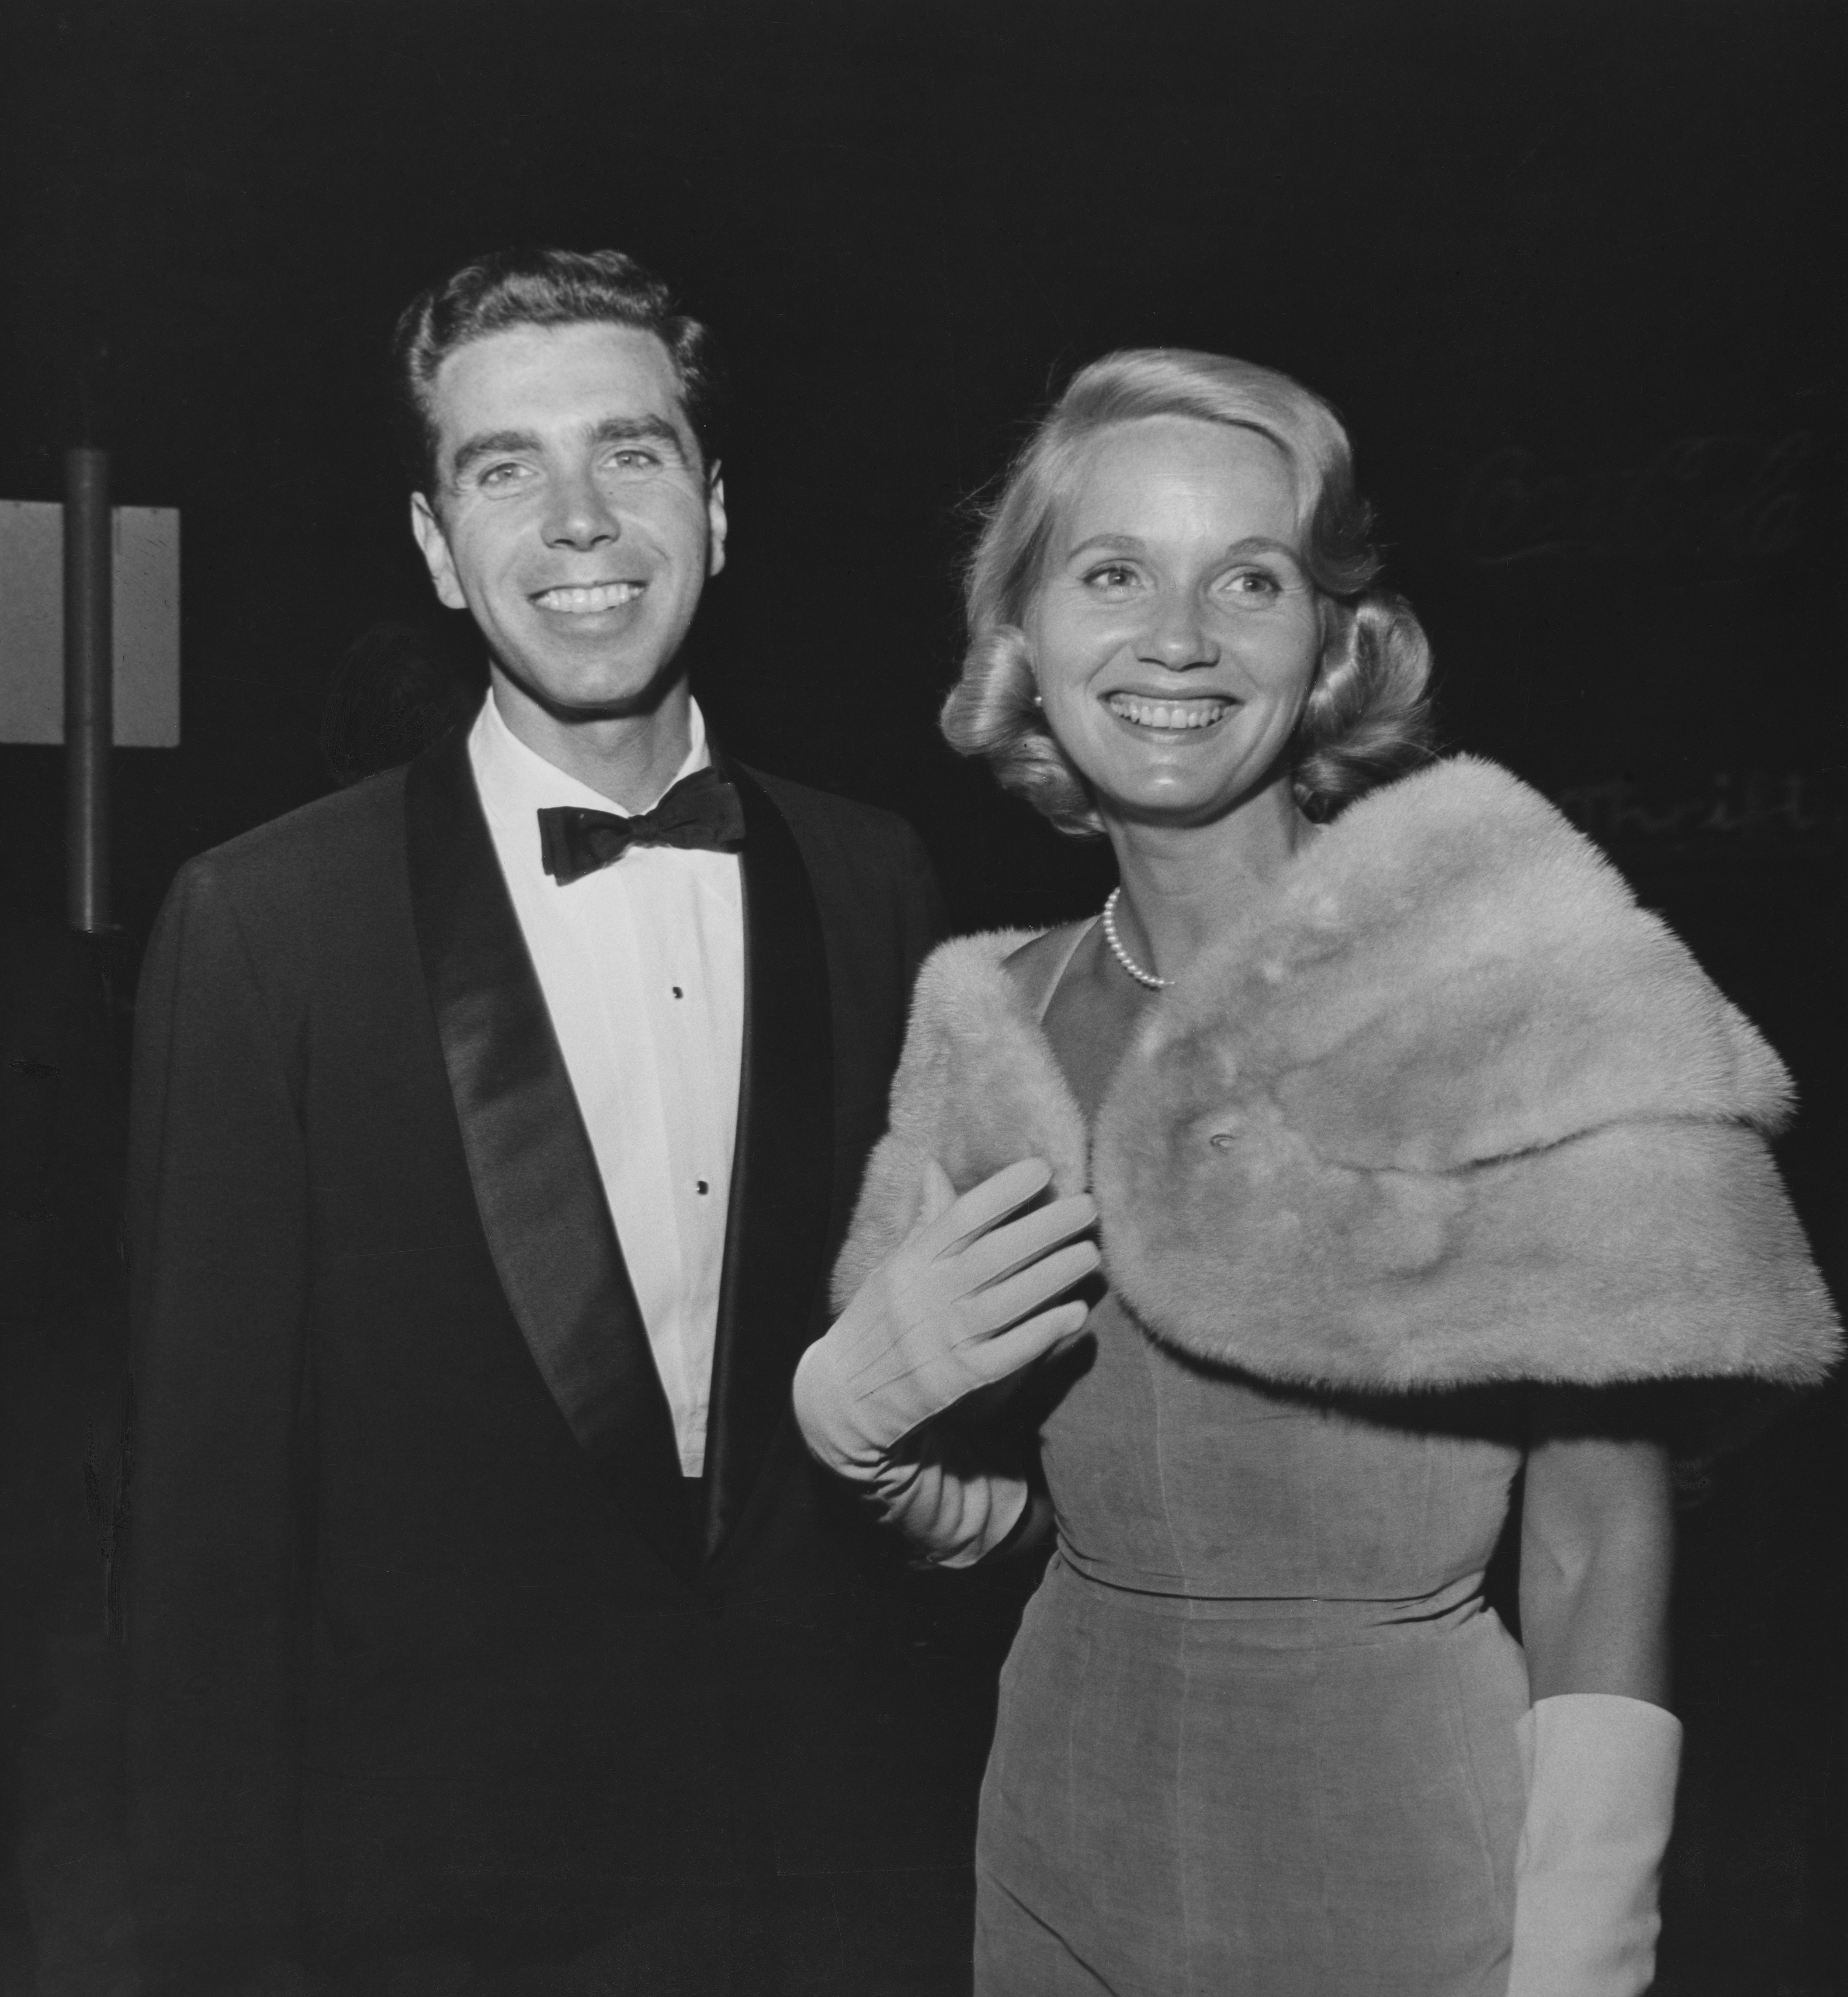 Jeffrey Hayden and Eva Marie Saint at the premiere of "The Big Country" in Los Angeles, 1958 | Source: Getty Images